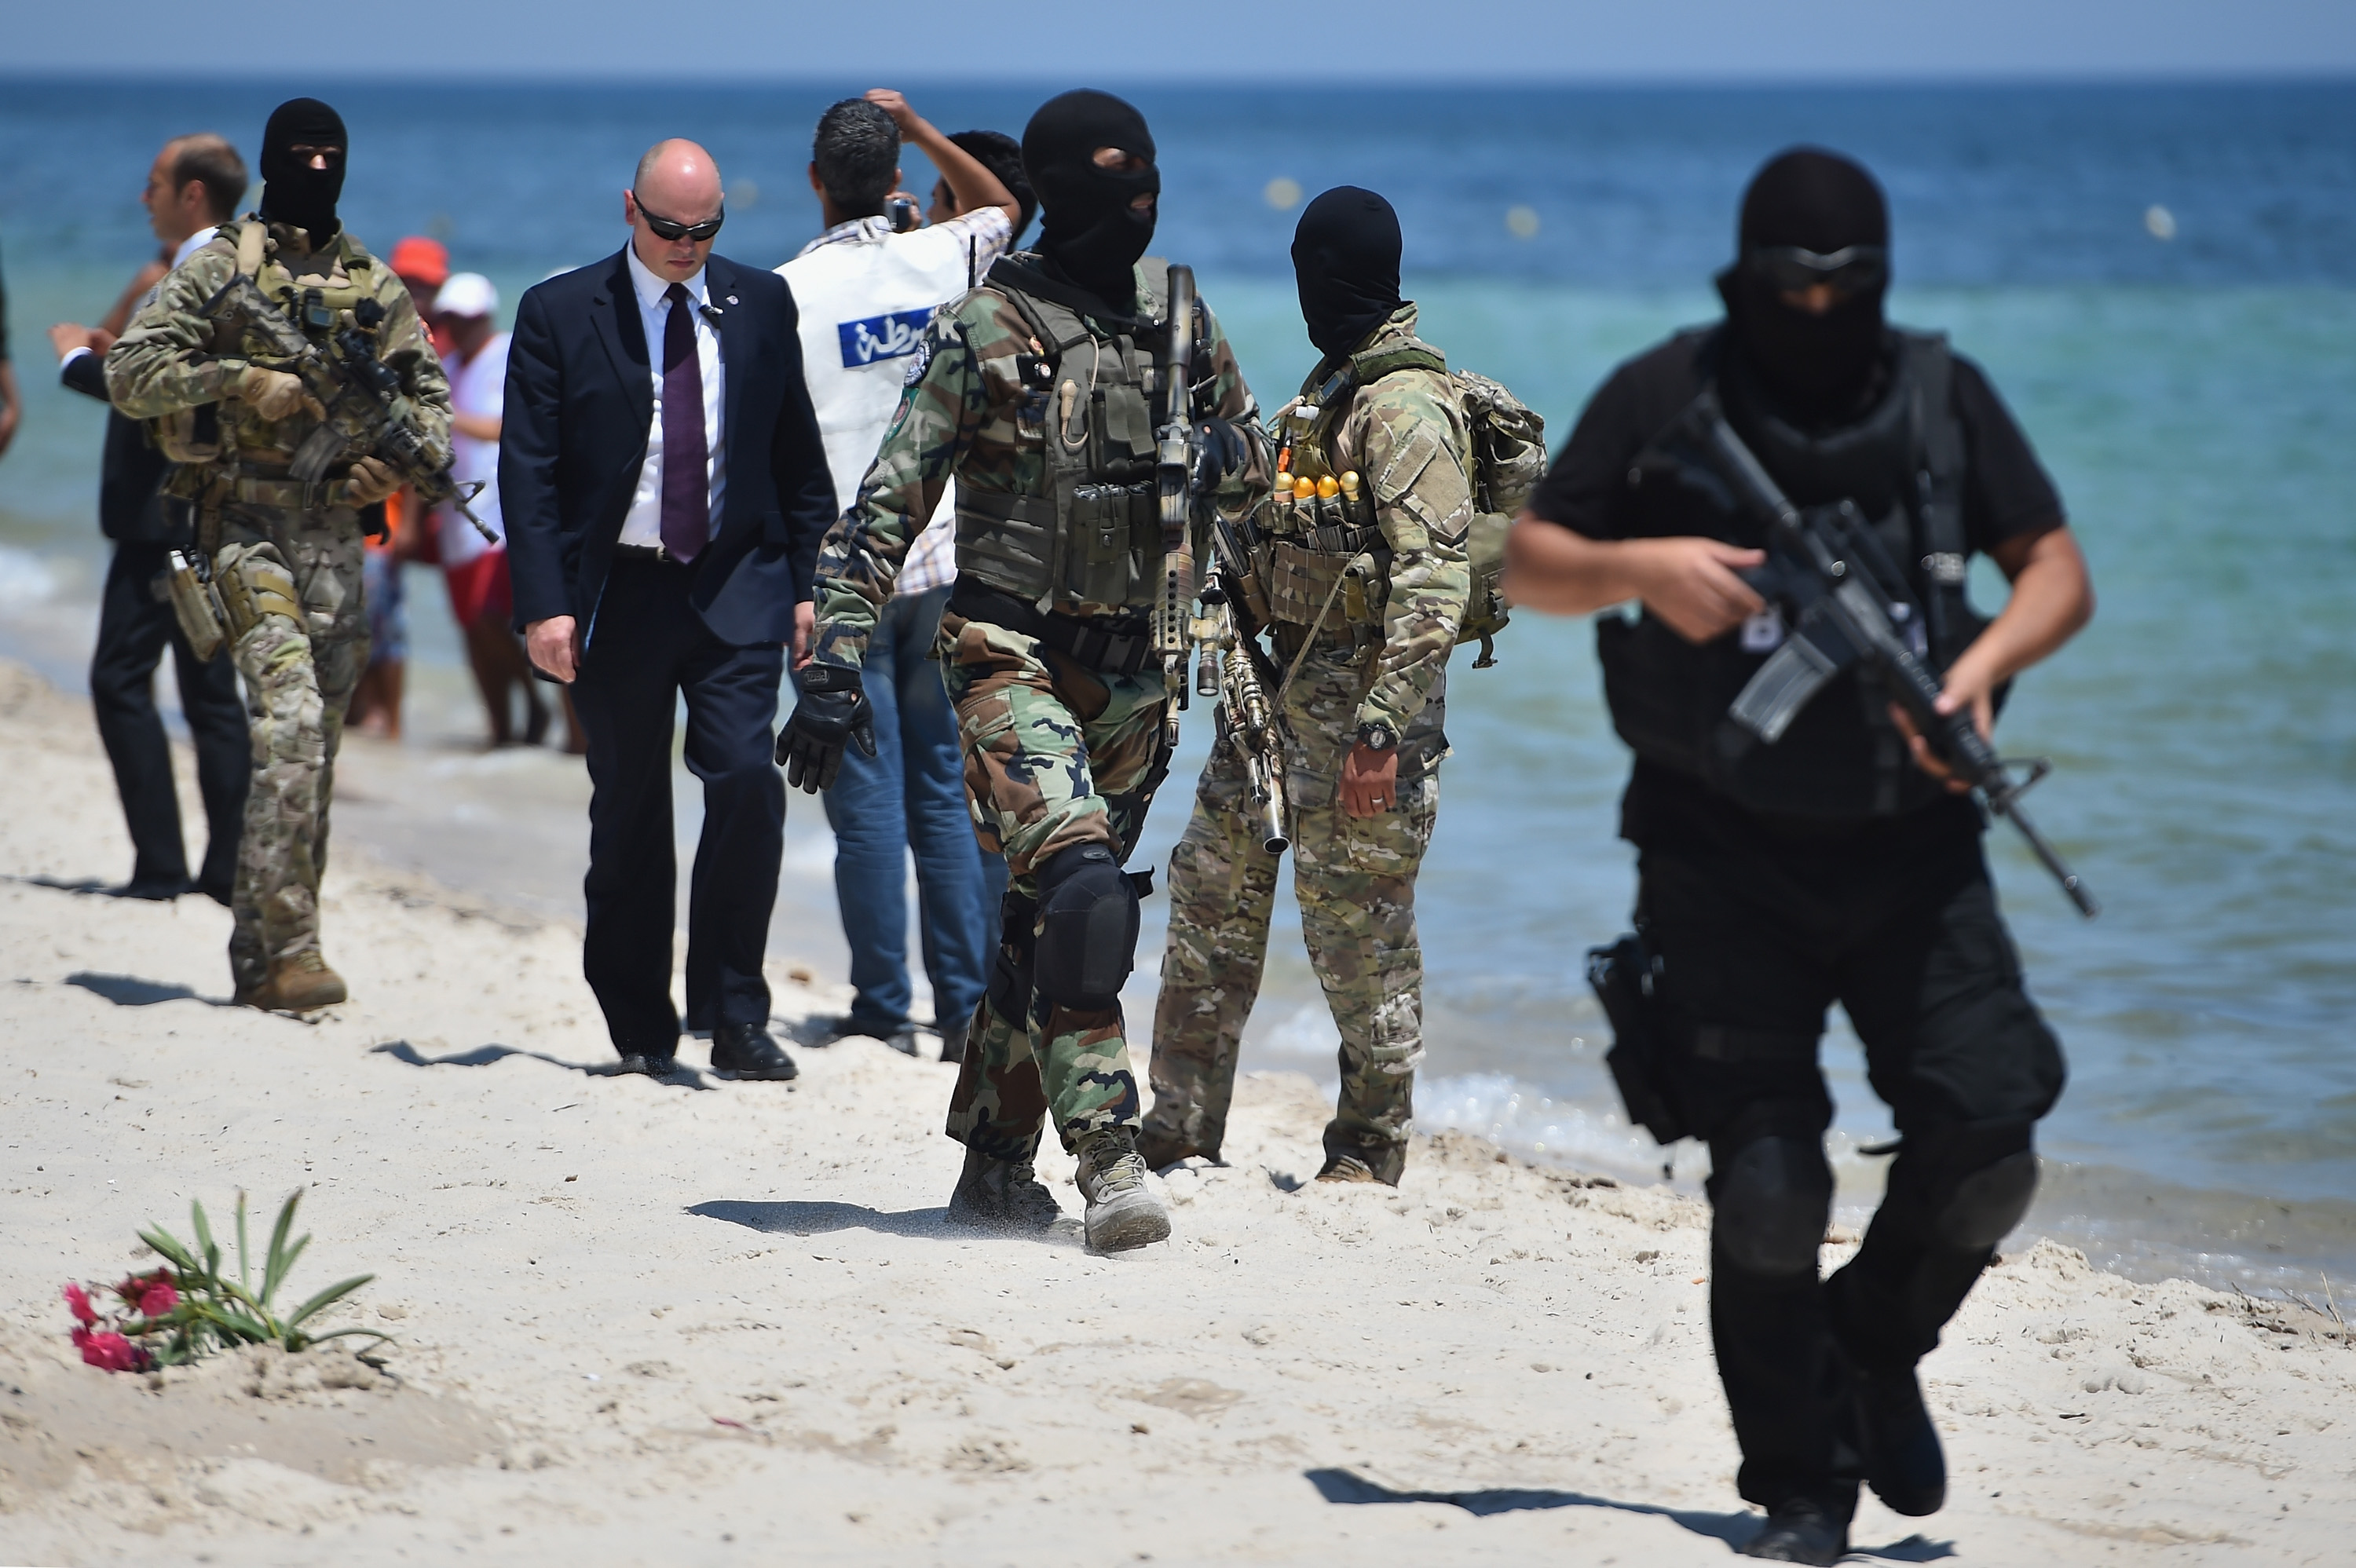 Armed guards patrol Marhaba beach during a visit by British Home Secretary Theresa May at the scene where 39 people were killed on June 29, in Sousse, Tunisia. (Jeff J Mitchell—Getty Images)